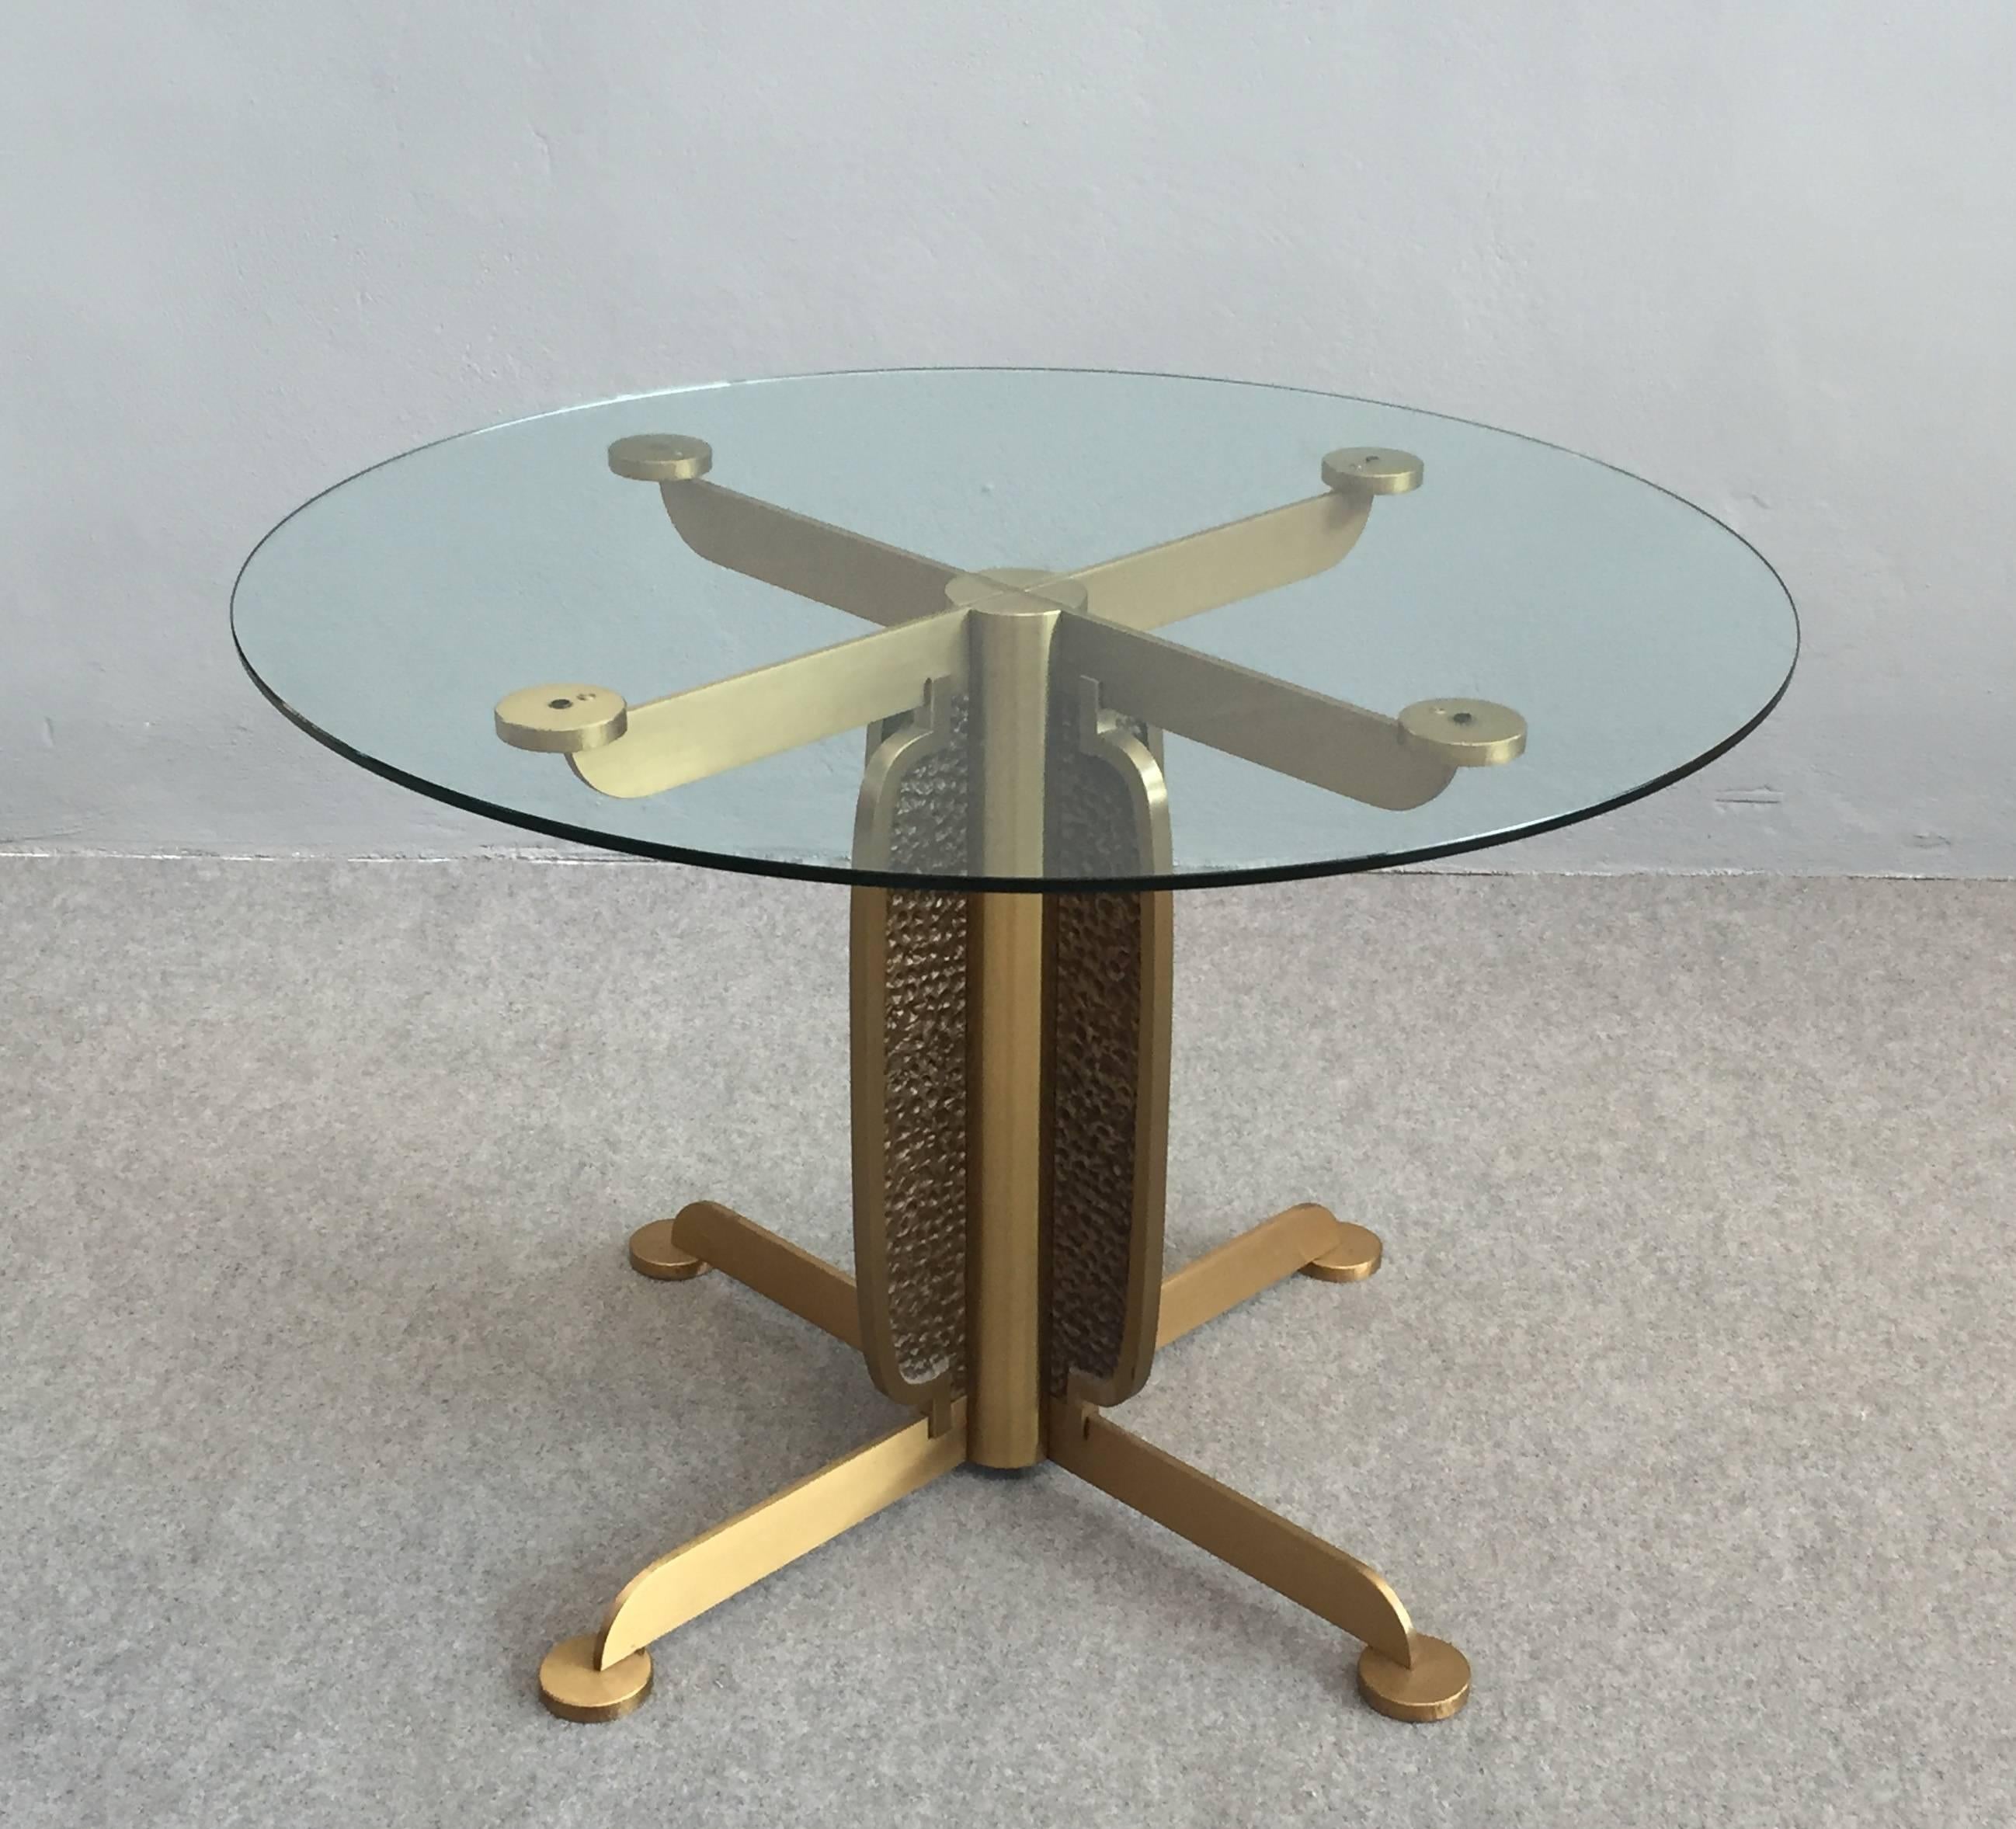 Marvelous sculptural Brutalist brass and glass dining table.